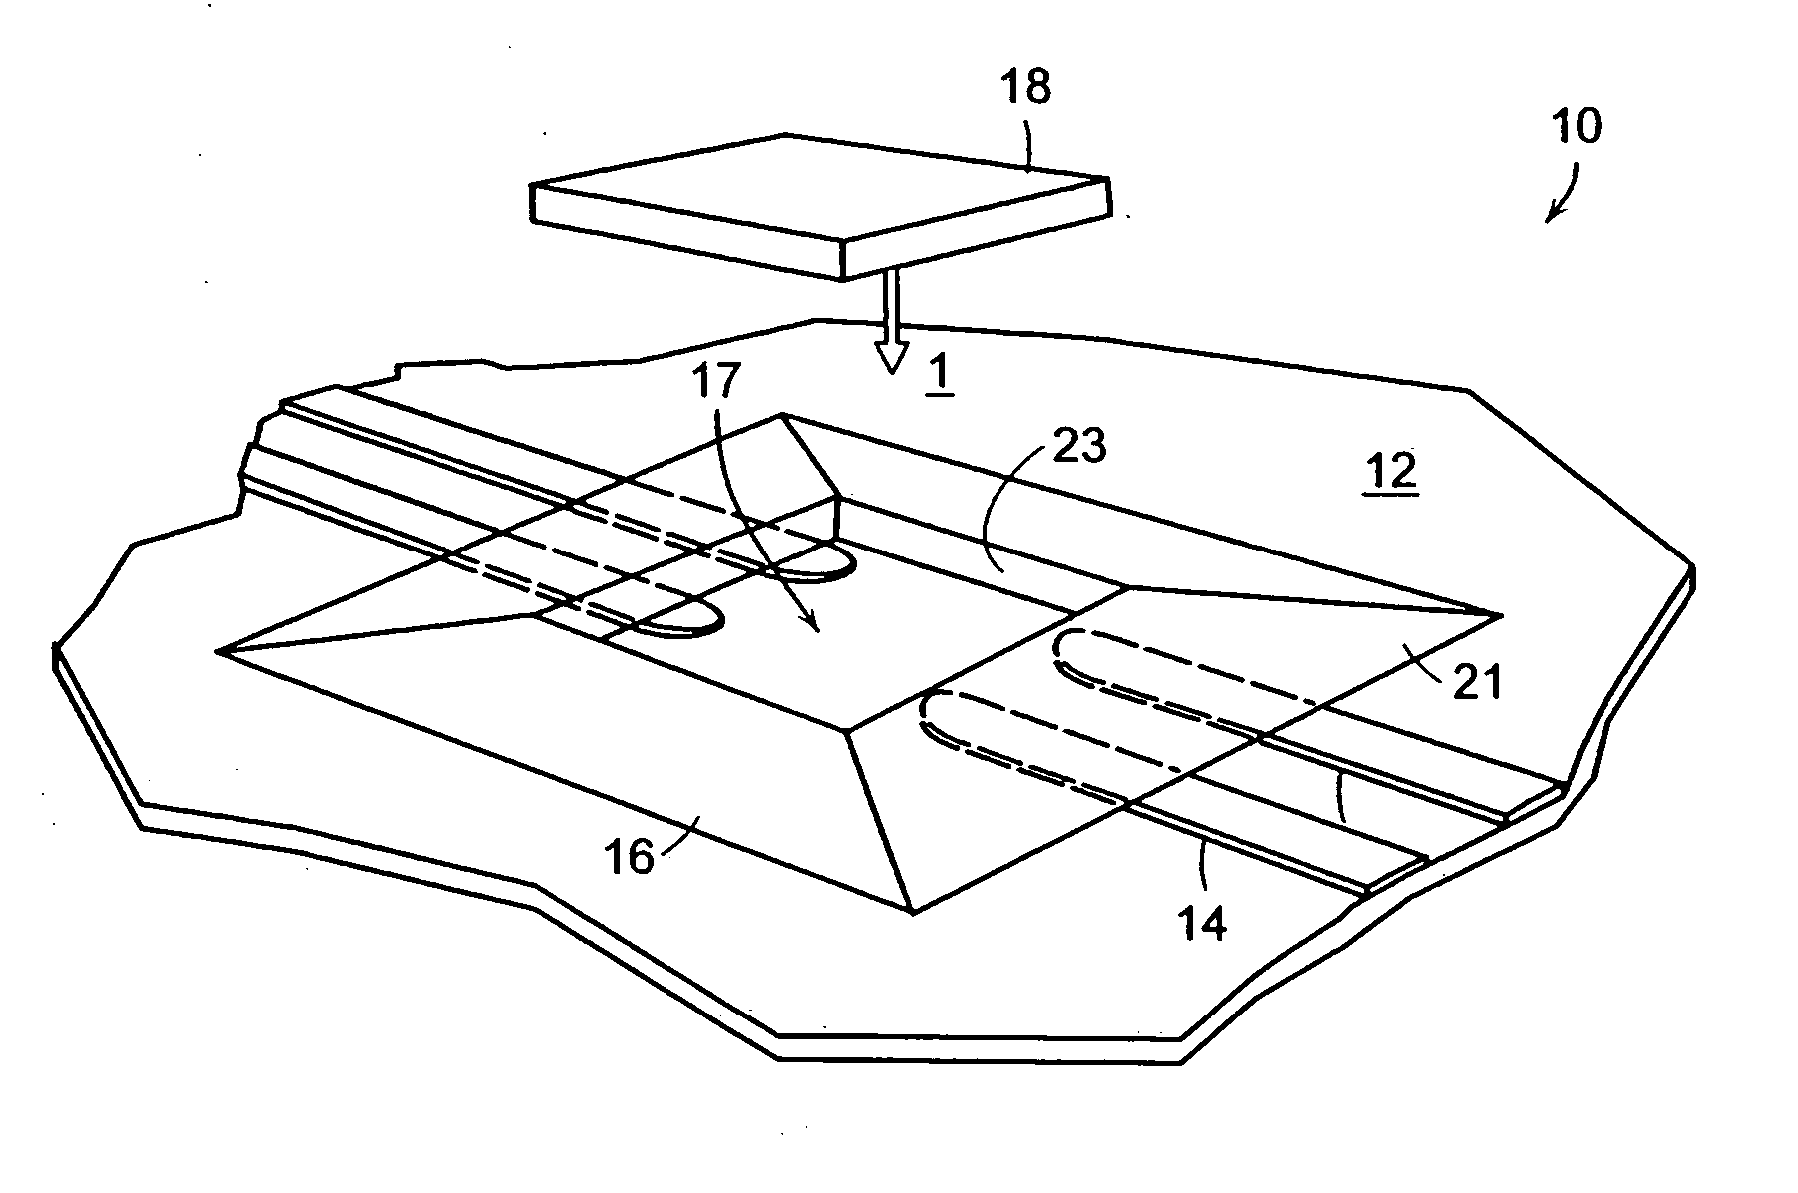 Semiconductor die positioning system and a method of bonding a semiconductor die to a substrate